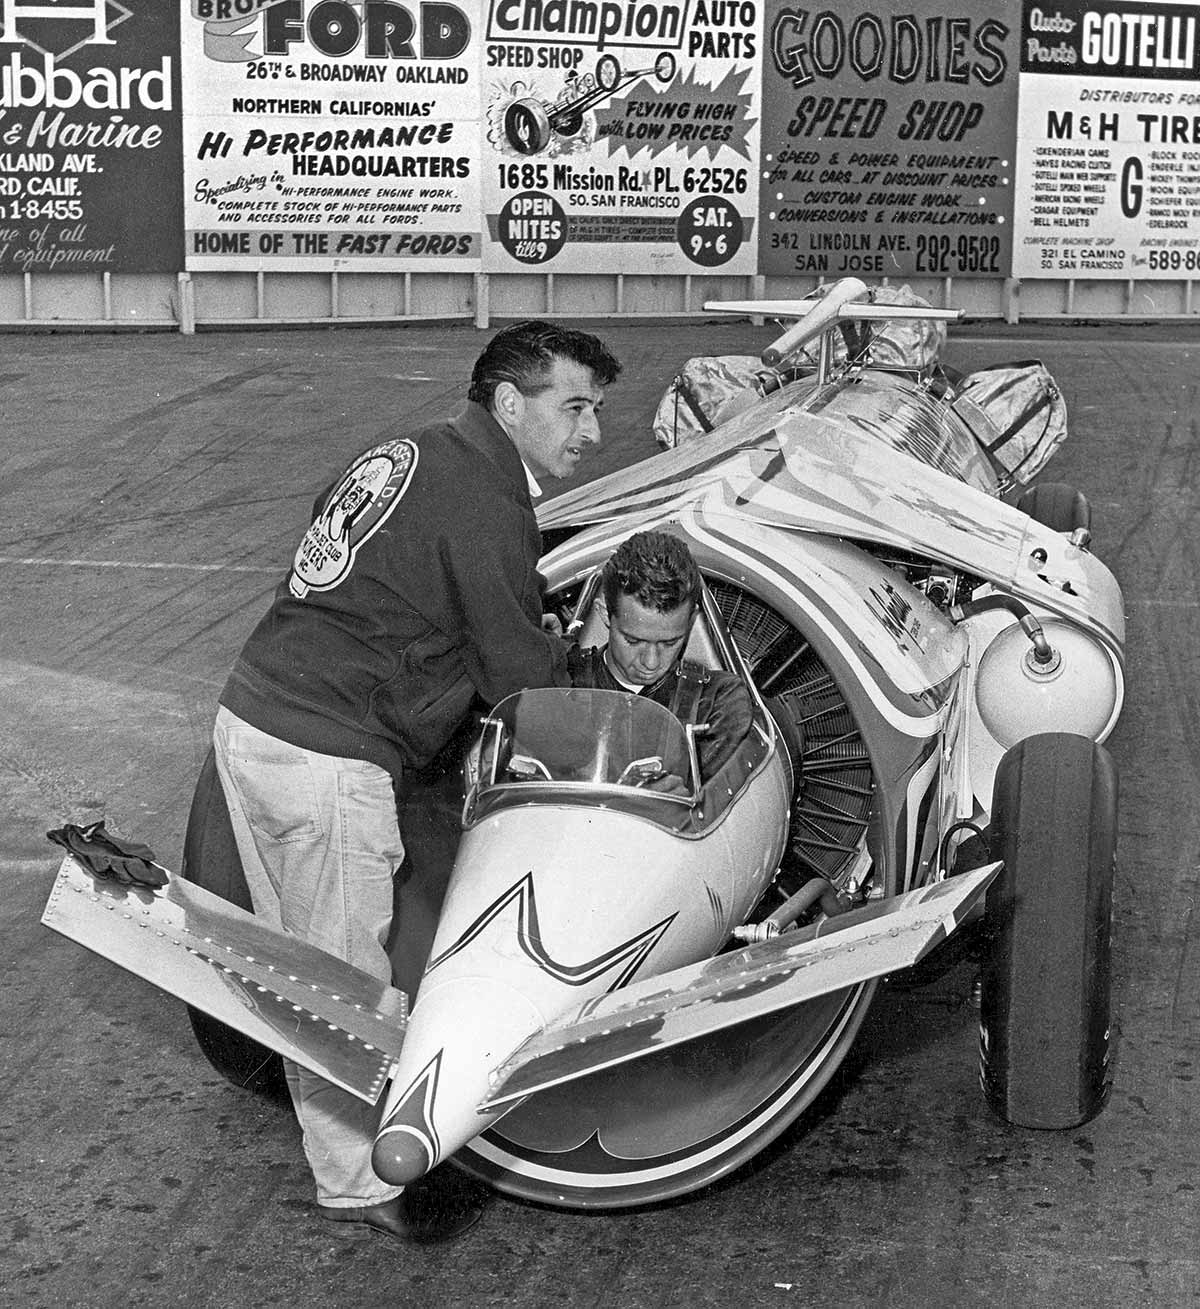 Black & white photograph of Palamides’ “Untouchable” jet dragster gave Tommy a huge canvas to apply his brilliant embellishments. The car is shown at starting apron area Fremont Dragstrip, 1966. The driver is Oakland’s Lon Gredetti, one of Palamides’ daredevil pilots who also raced speedboats.